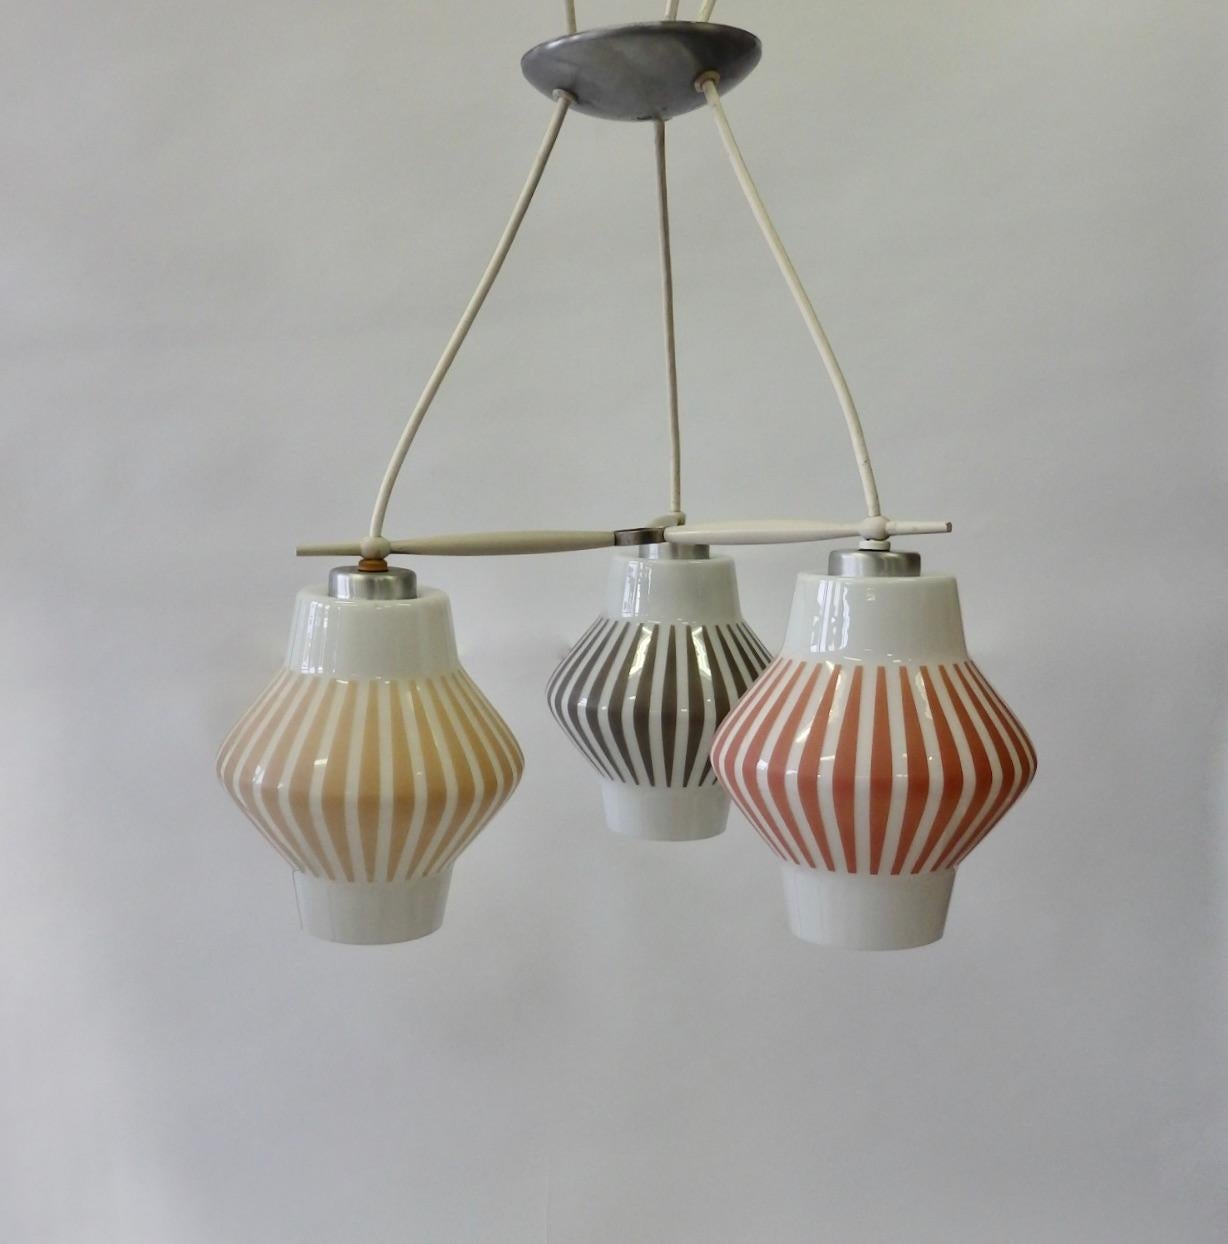 Midcentury Multicolored 3 Globe Hanging Ceiling Light Fixture In Good Condition For Sale In Ferndale, MI